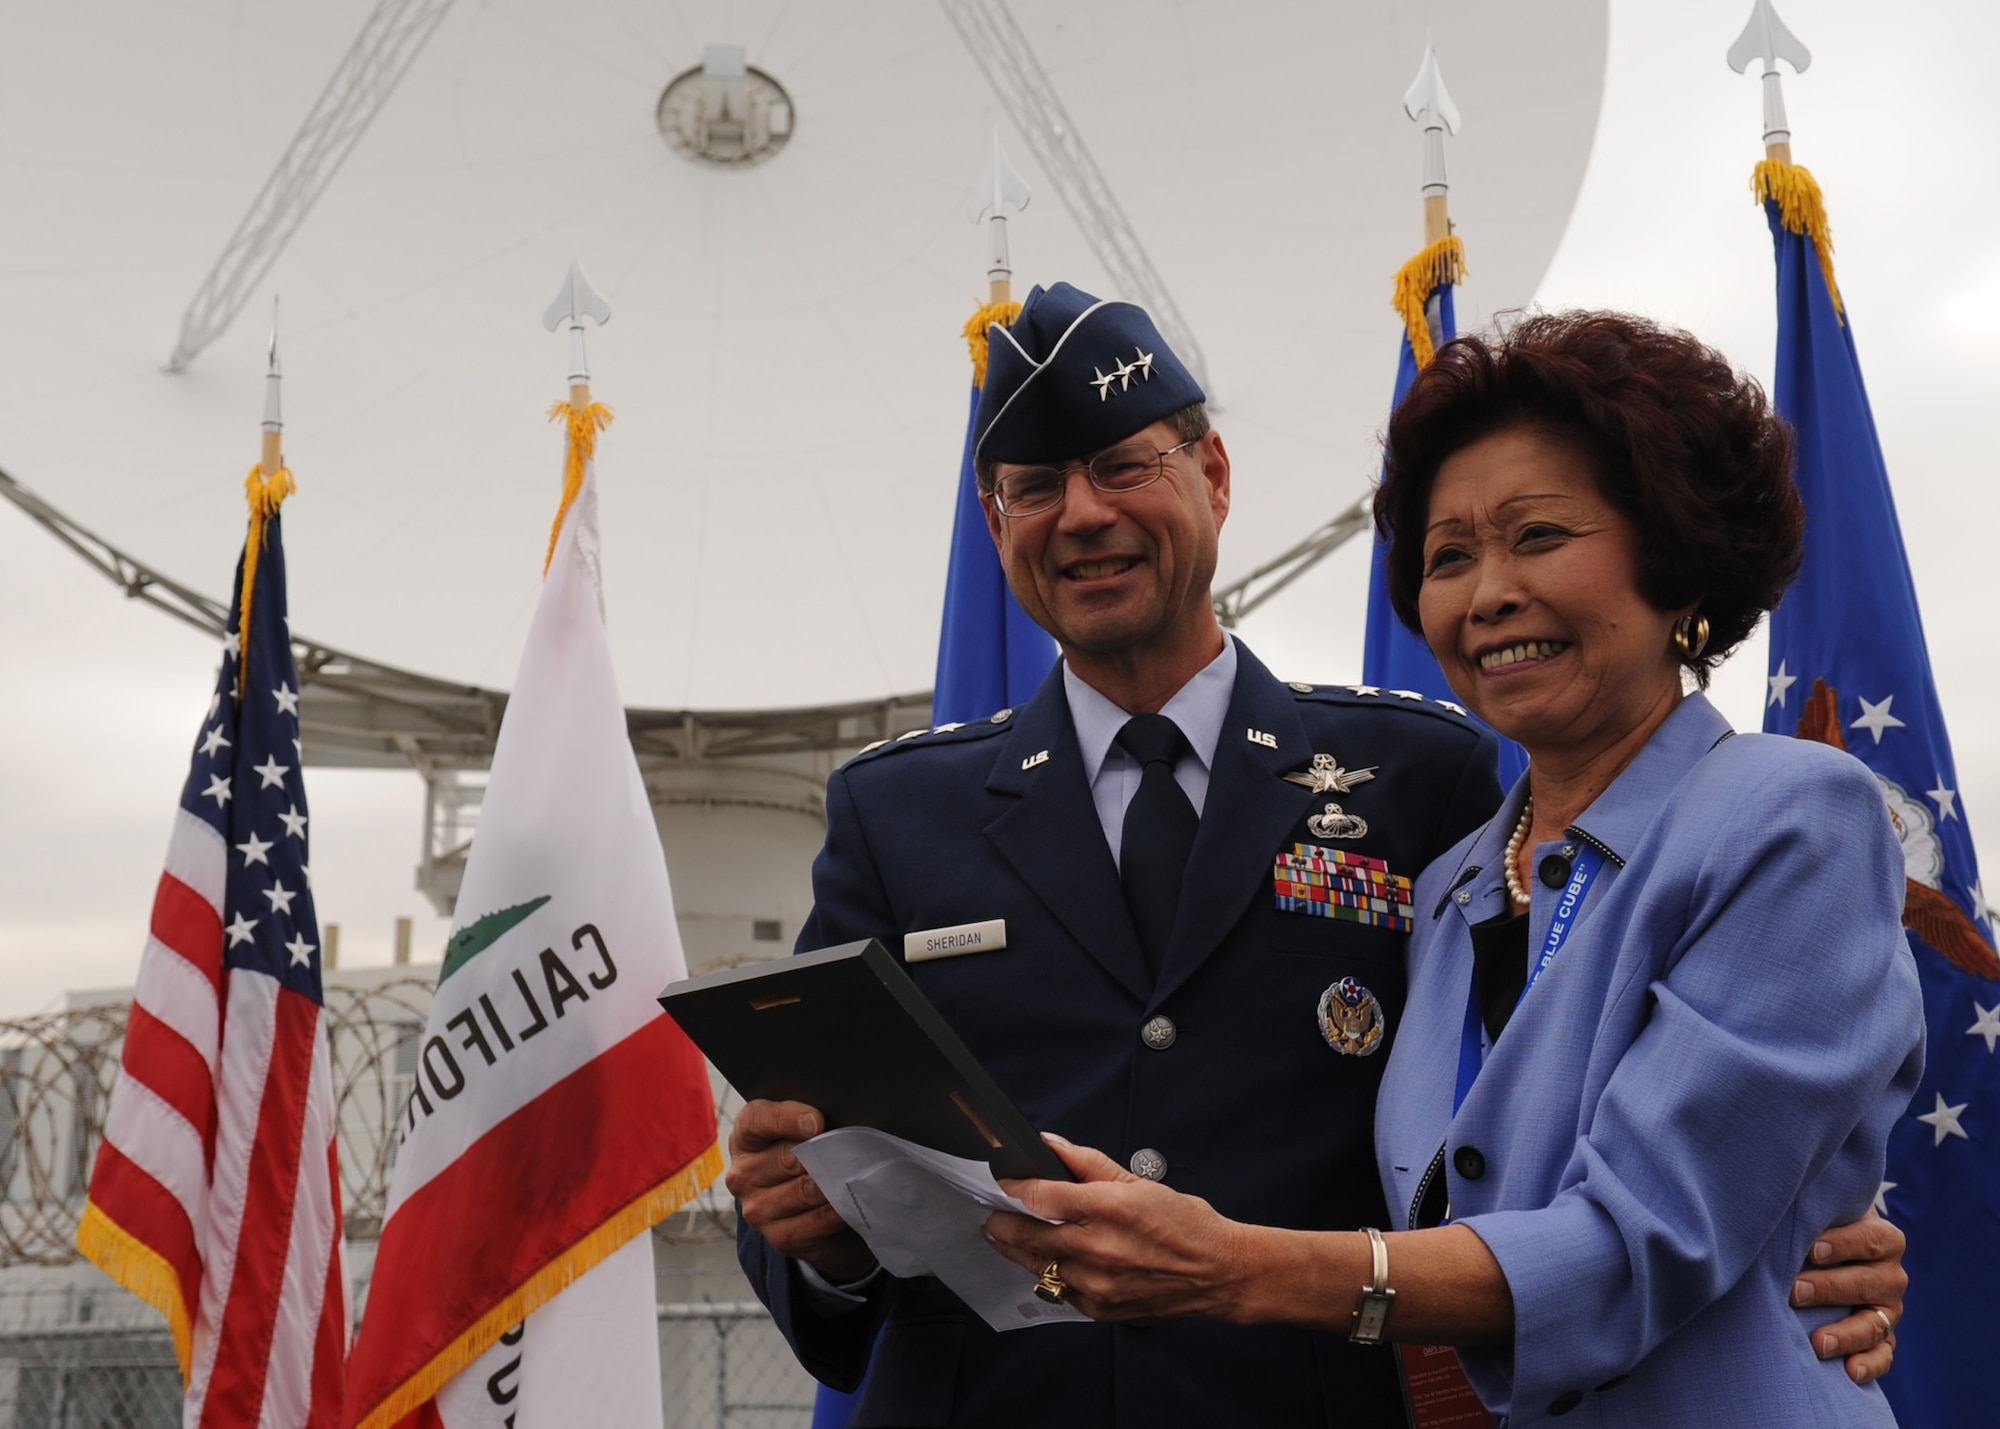 SUNNYVALE, Calif.-- Lt. Gen. John T. Sheridan, commander of the Space and Missile Center, Los Angeles Air Force Base, presents Lorna Onizuka, widow of Col. Ellison Onizuka, astronaut aboard the Space Shuttle Challenger disaster, with a commemorative plaque during a closure ceremony for Onizuka Air Force Station here, Wednesday, July 28, 2010. Built in 1960, Onizuka AFS was originally known as the Air Force Satellite Test Center. It was selected for closure by the Base Closure and Realignment Commission in 2005, with the recommendation to move operations to Vandenberg Air Force Base, in order to consolidate satellite command and control operations while reducing excess infrastructure.  (U.S. Air Force Photo/Senior Airman Bryan Boyette)